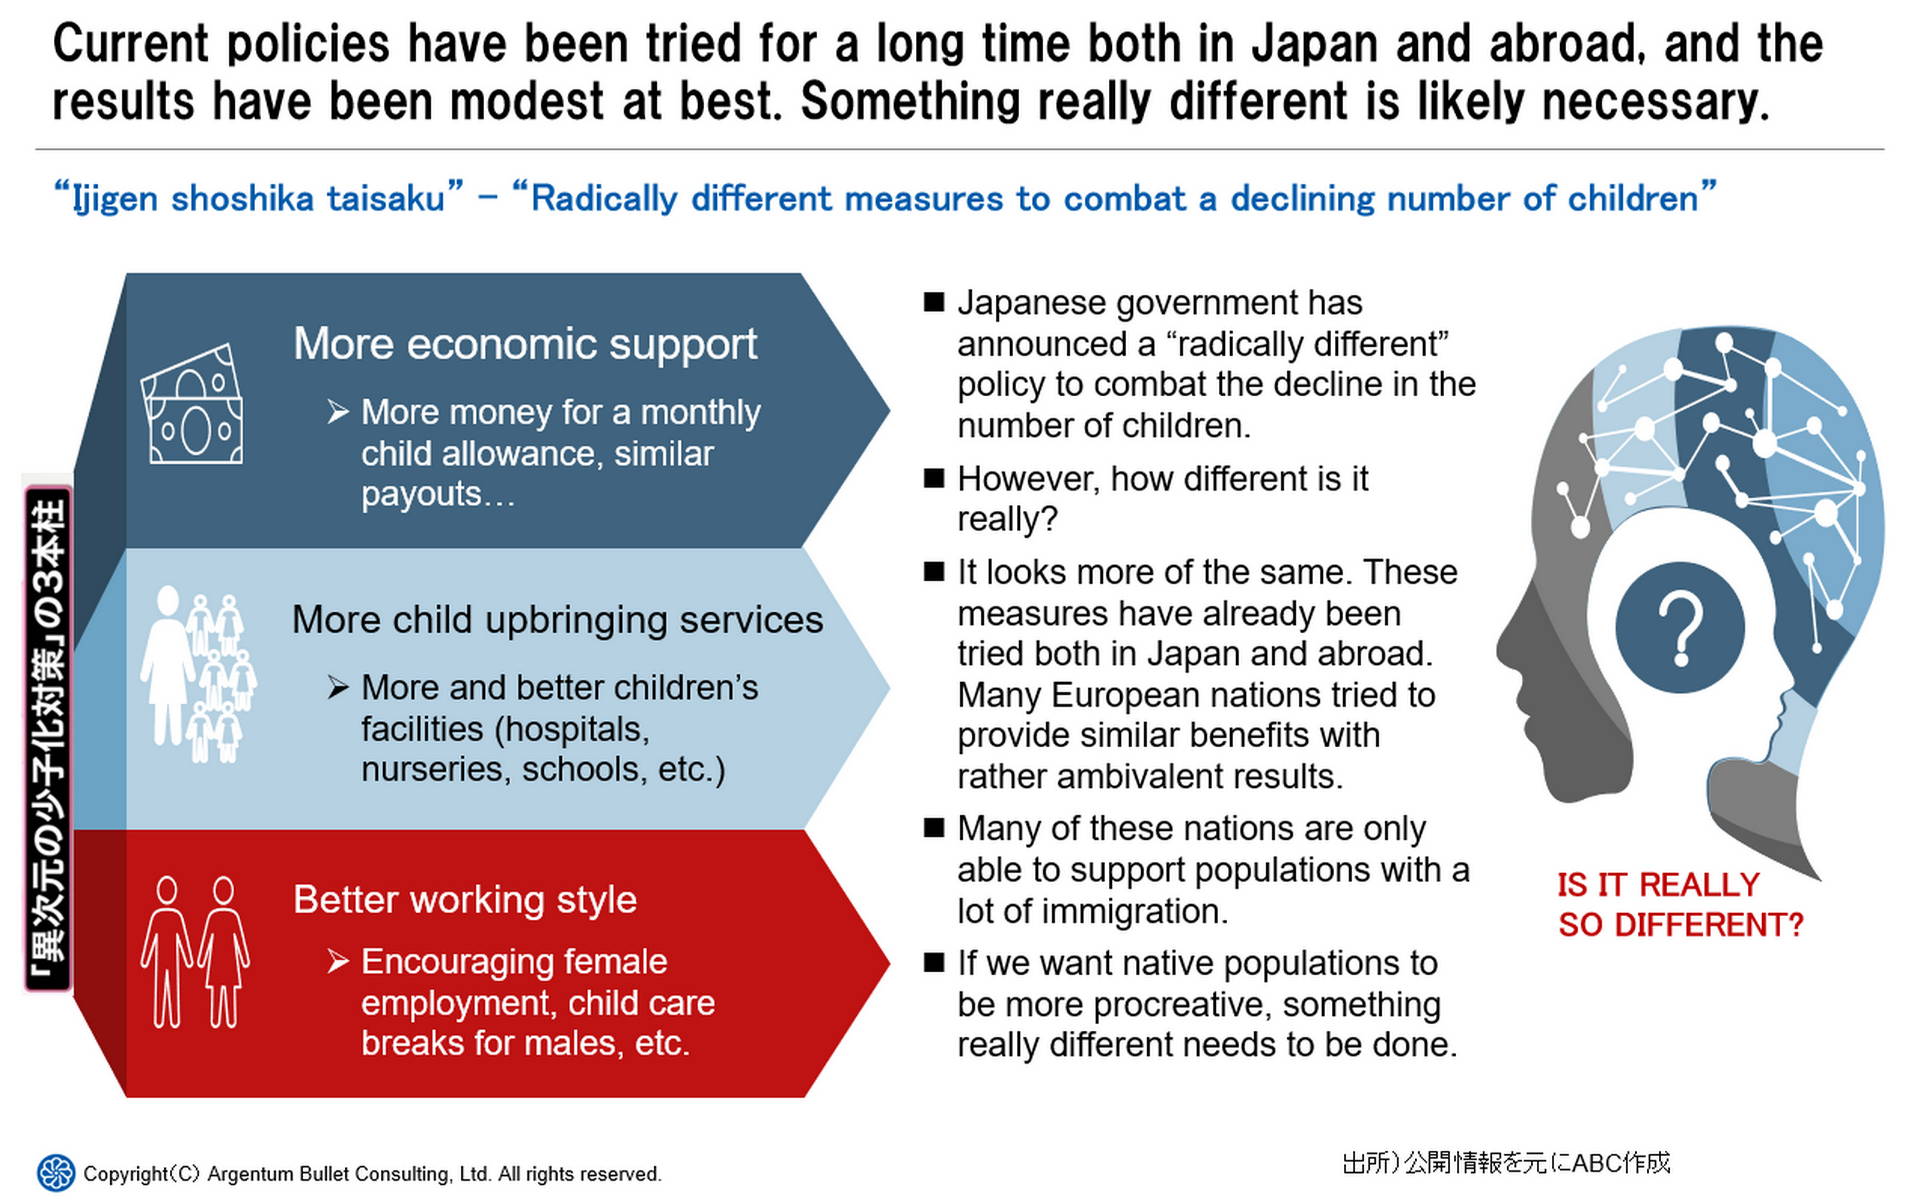 Japanese policy to stop low number of children 異次元少子化対策